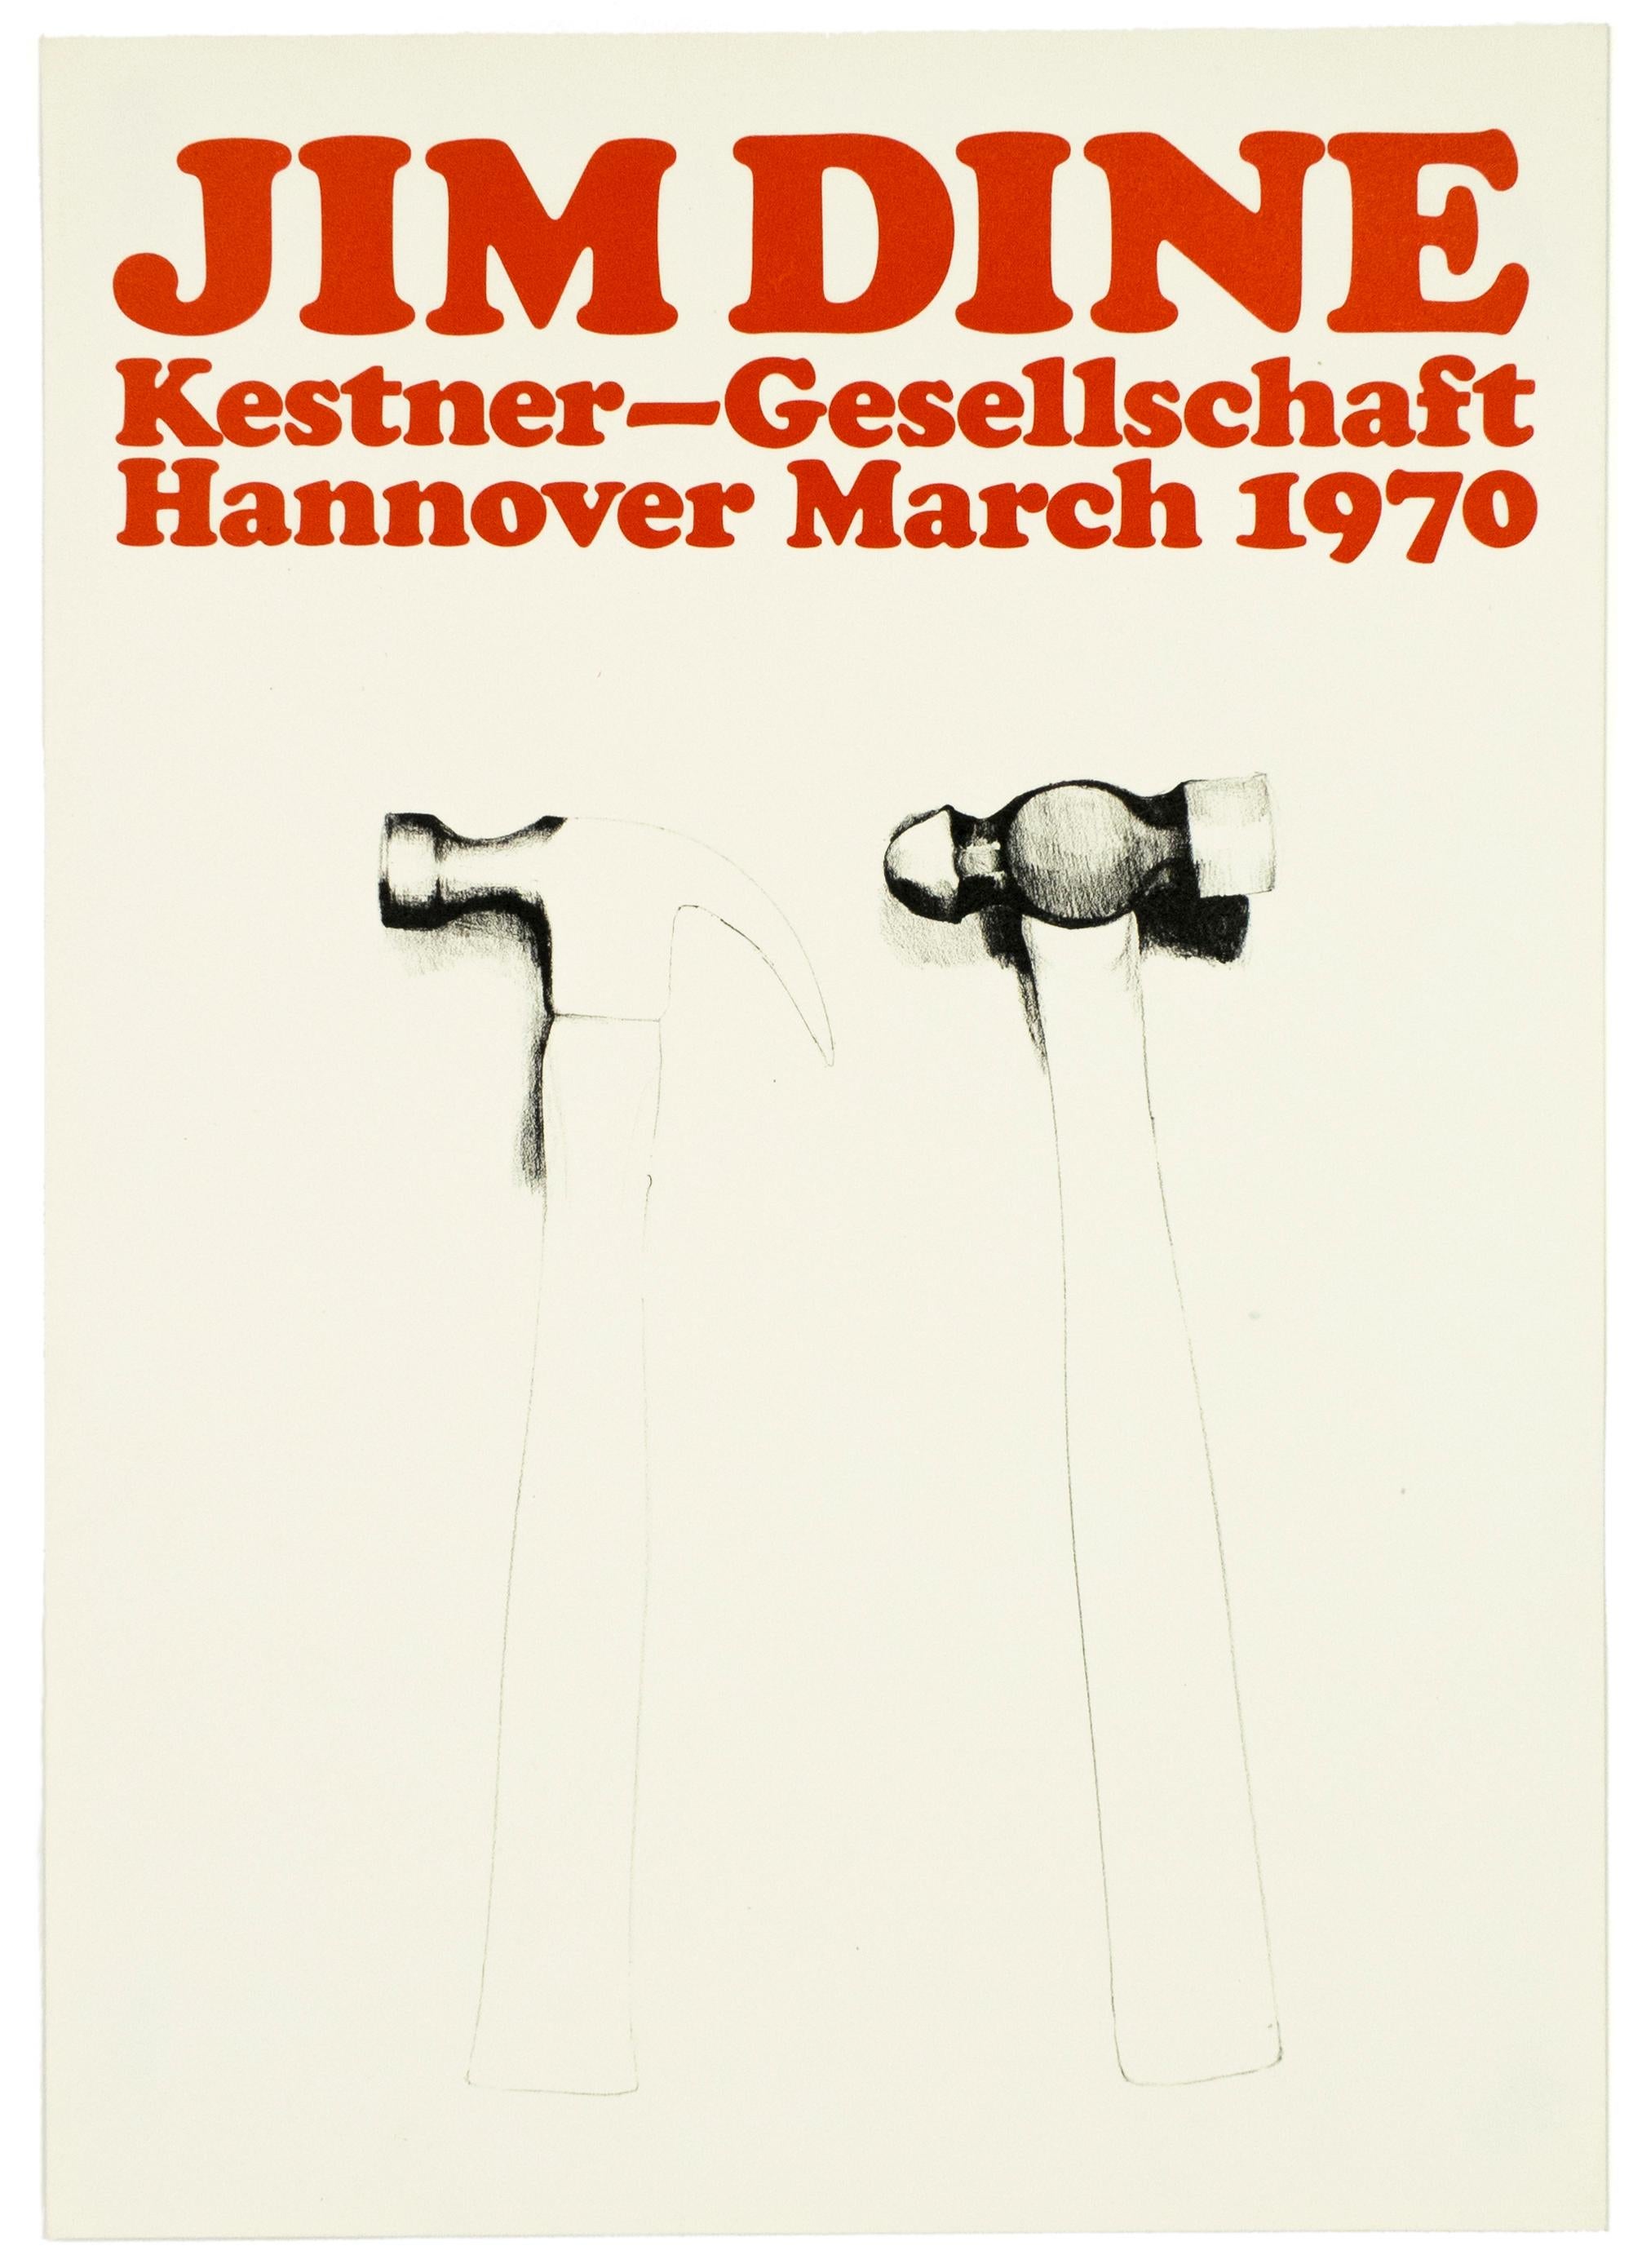 This vintage exhibition poster reproduces Jim Dine’s 1970 lithograph Hammers, which is in the collection of the Museum of Contemporary Art, Chicago. It was produced for Dine’s Complete Graphics 1970 exhibition at the Kestner Gesellschaft, Hannover,